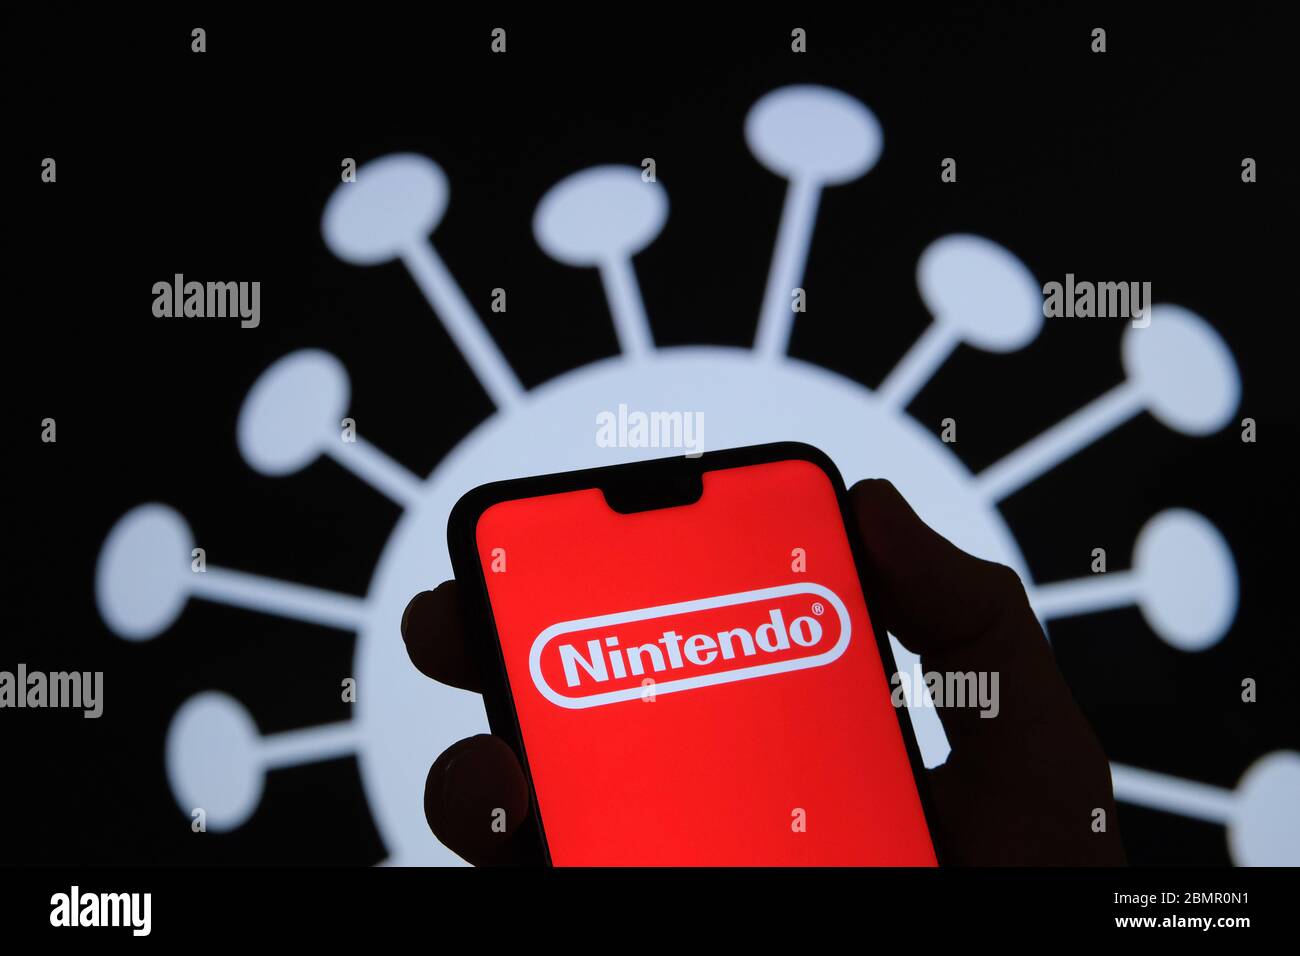 Nintendo company logo on a smartphone silhouette hold in hand. Coronavirus image on the blurred background. Real photo, not a montage. Stock Photo